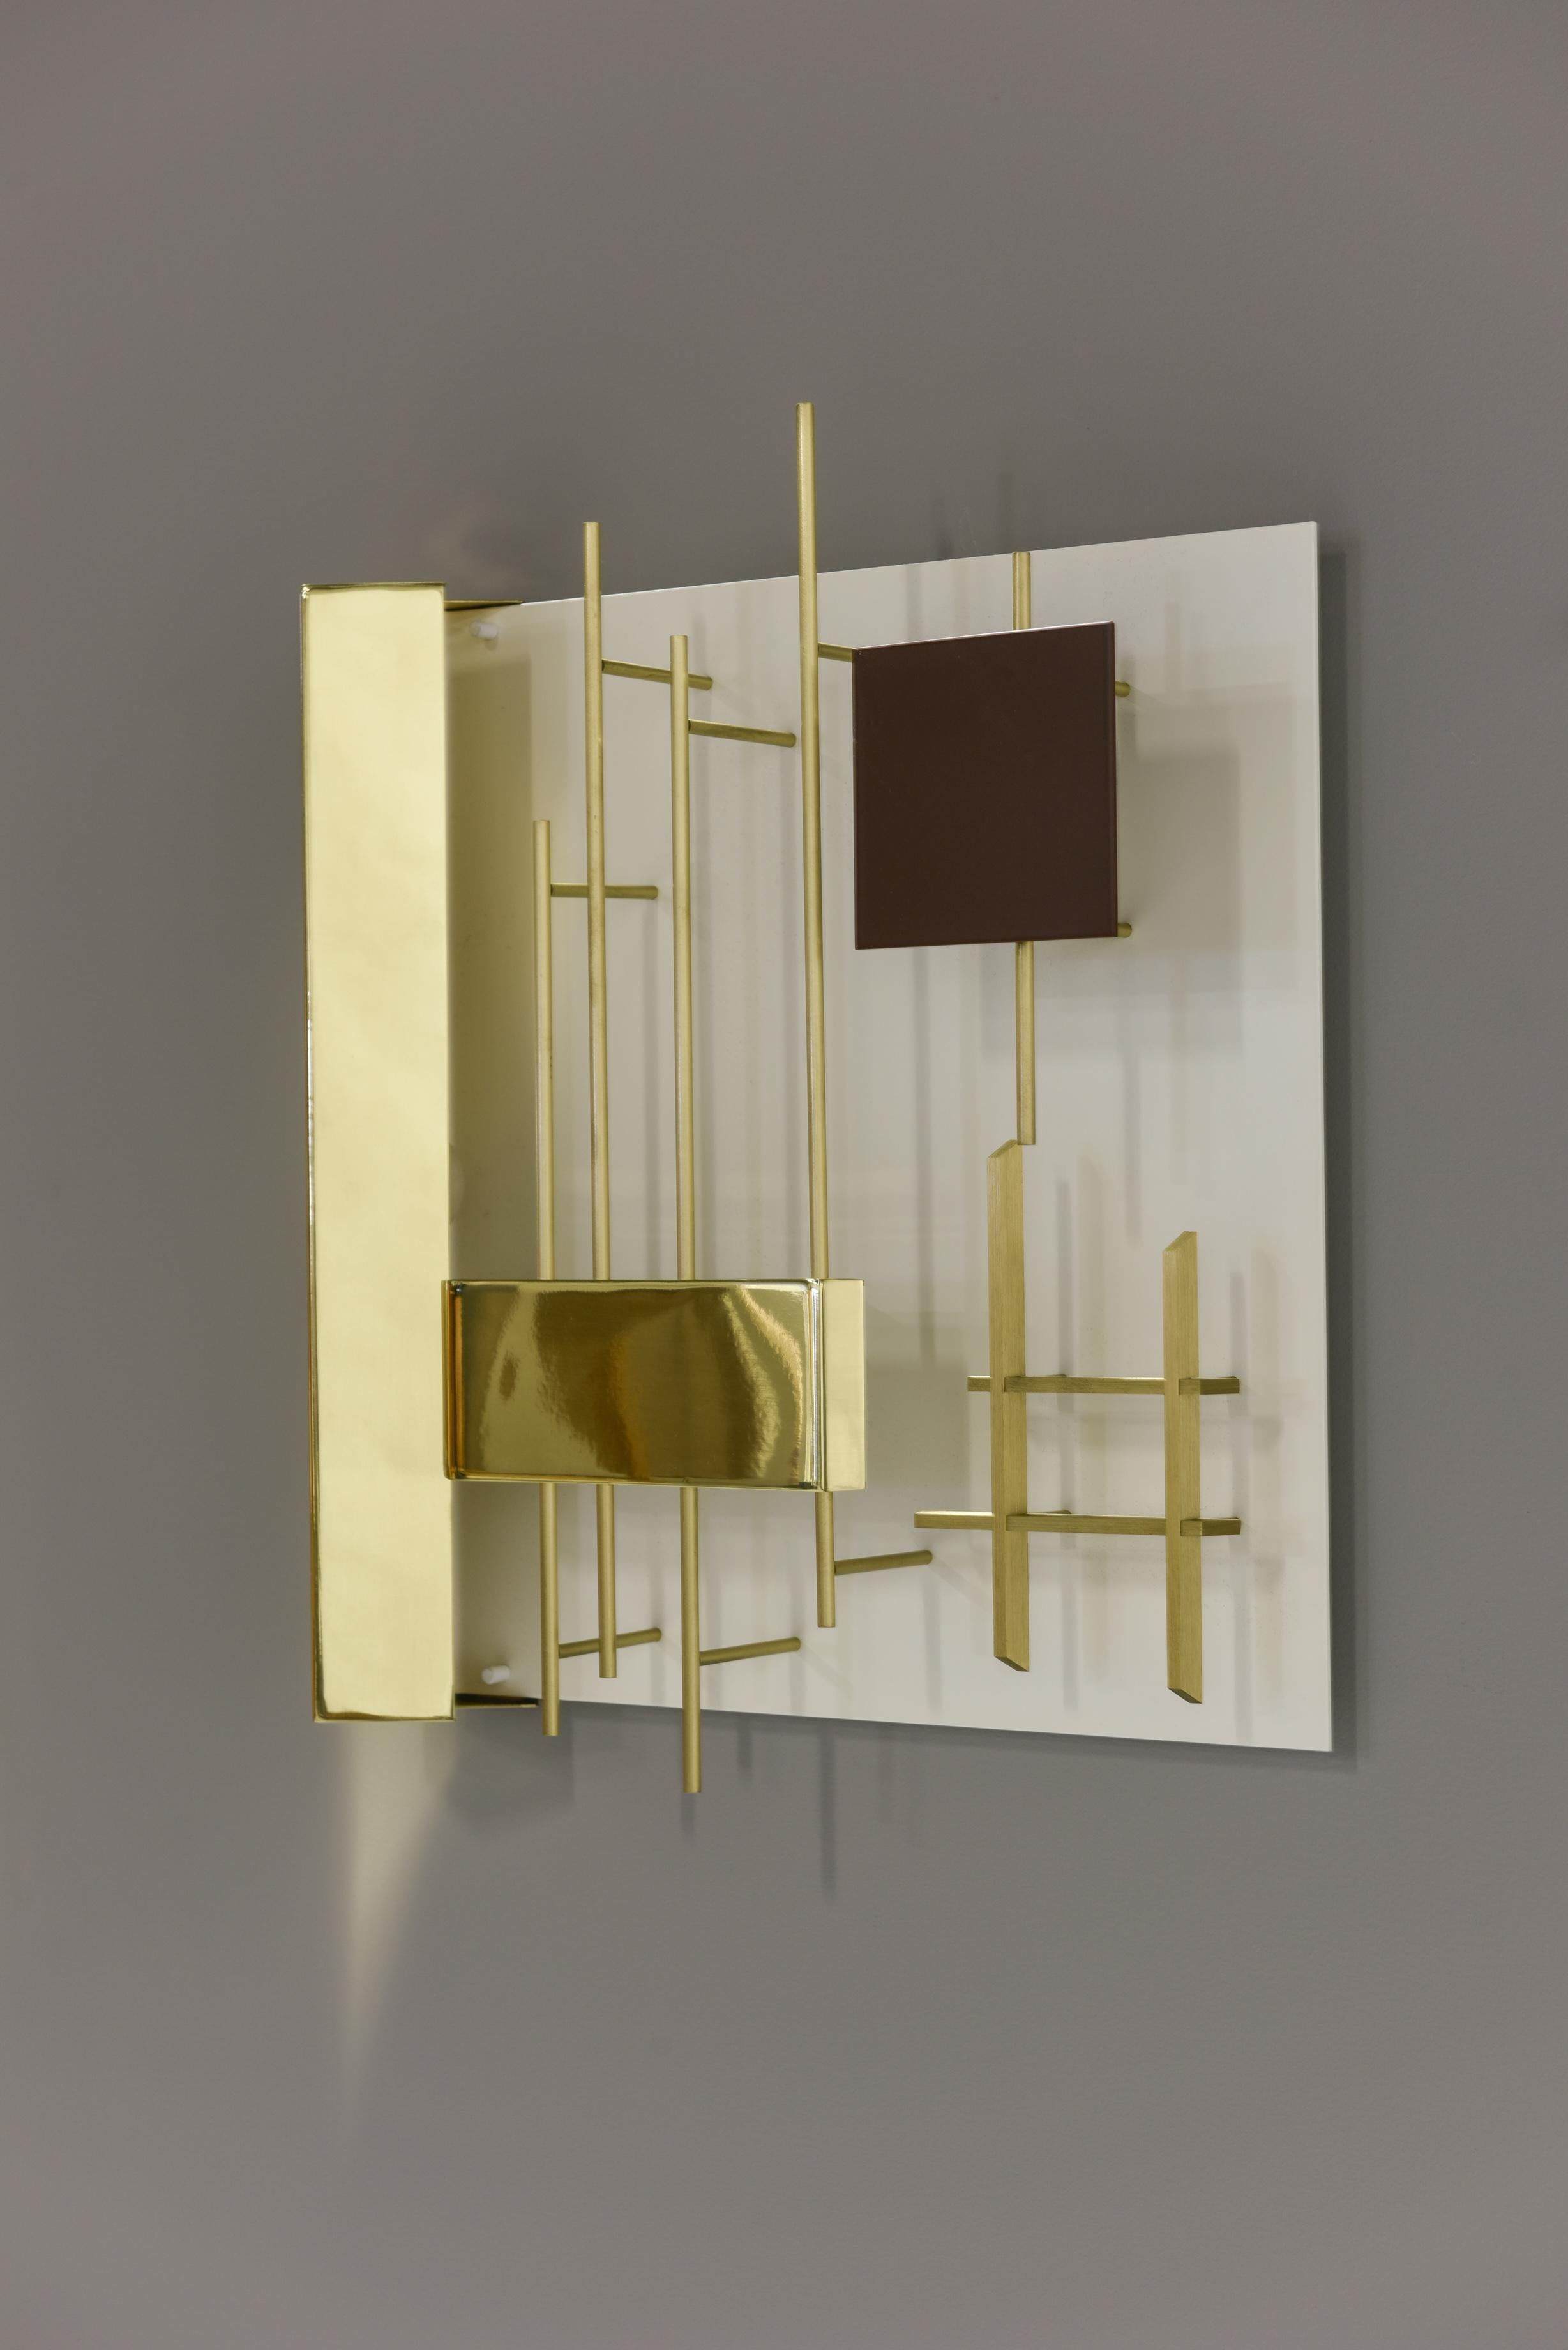 Mid-20th Century Gio Ponti Pair of Sculptural Wall Sconces Model 575 for Lumi Milano For Sale